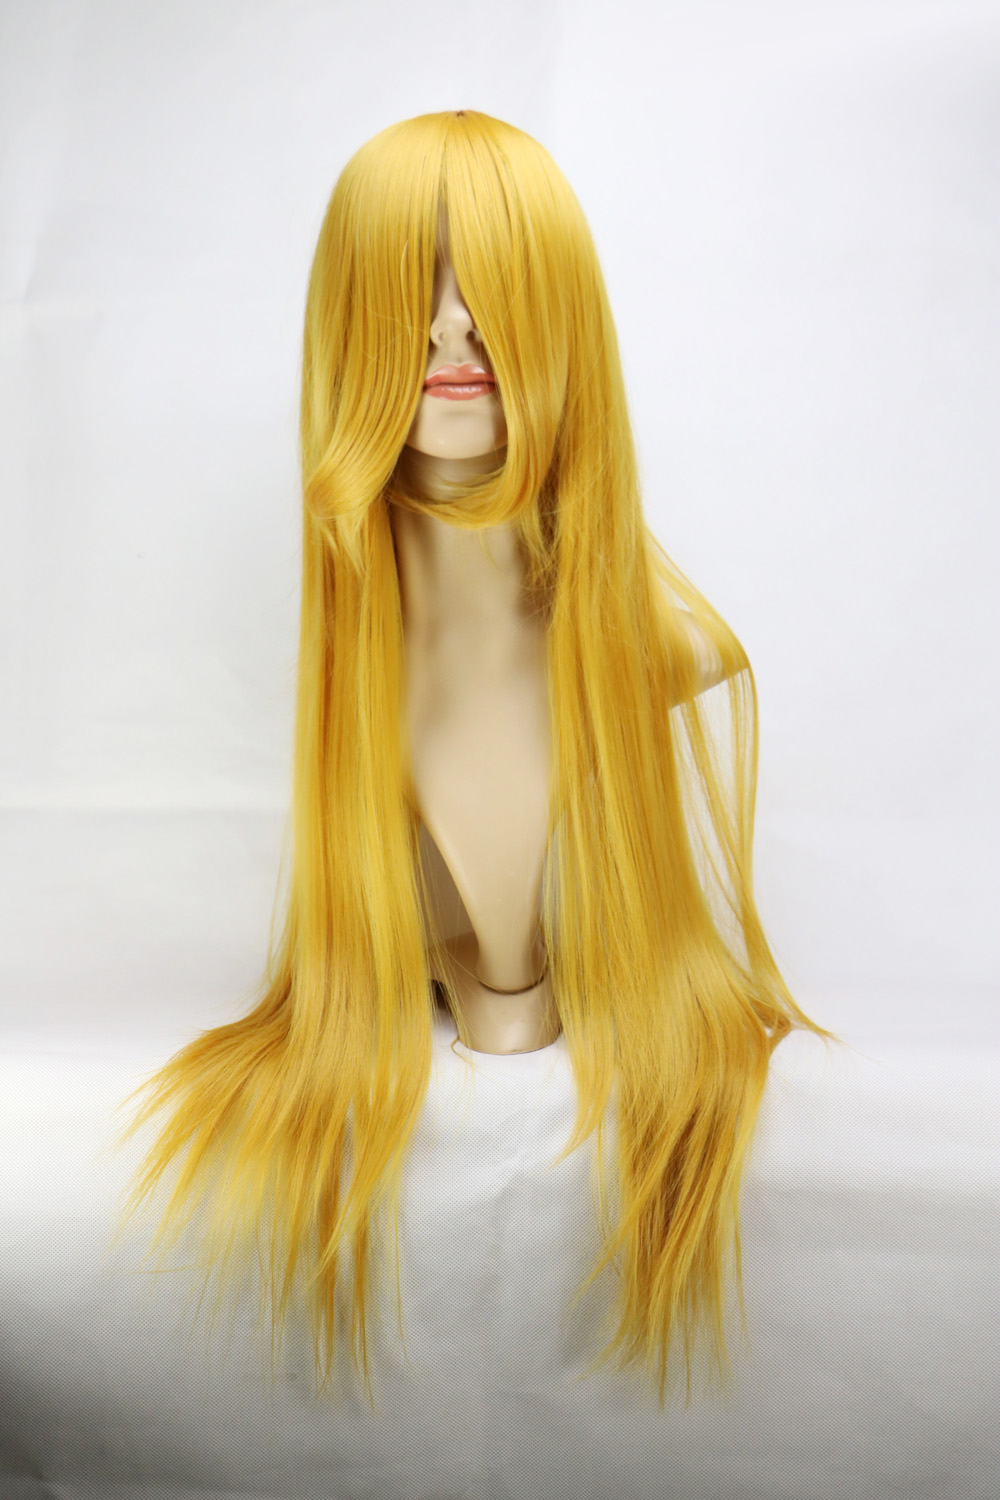 Women Men Cosplay Wig Anime 80 Cm Long Straight High Quality Synthetic Hair...